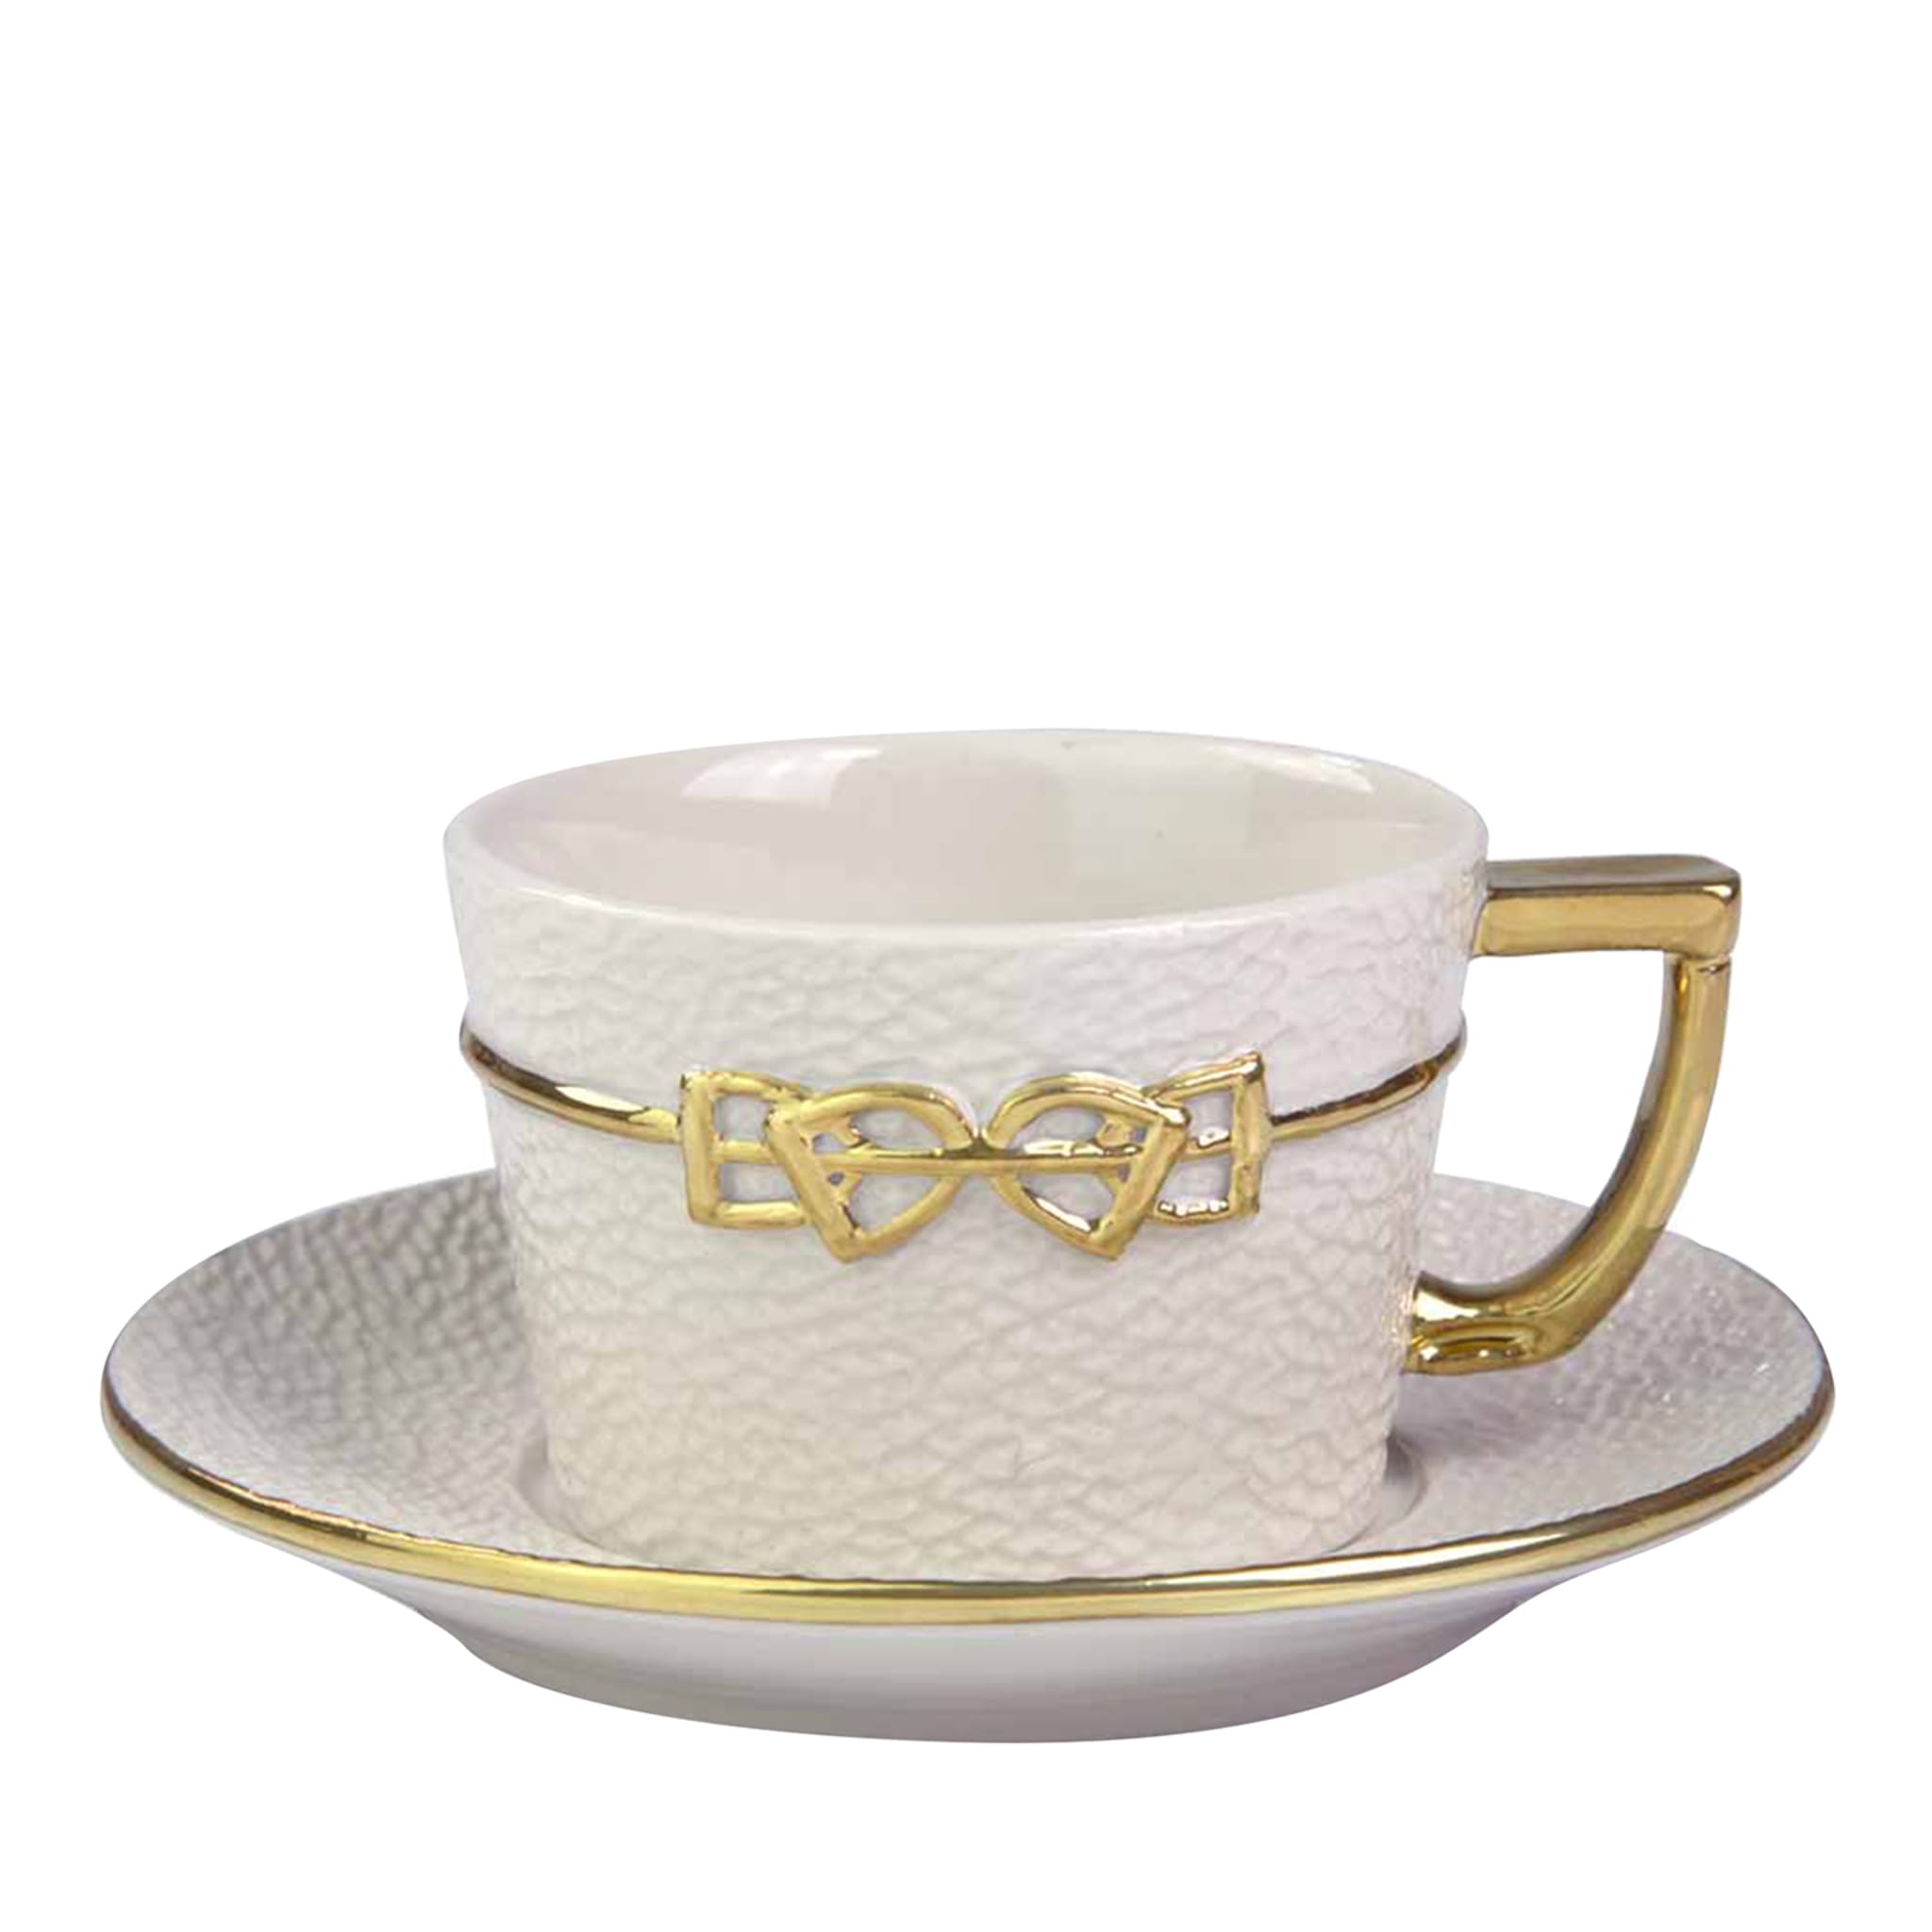 DRESSAGE COFFEE CUP AND SAUCER - WHITE AND GOLD - Main view